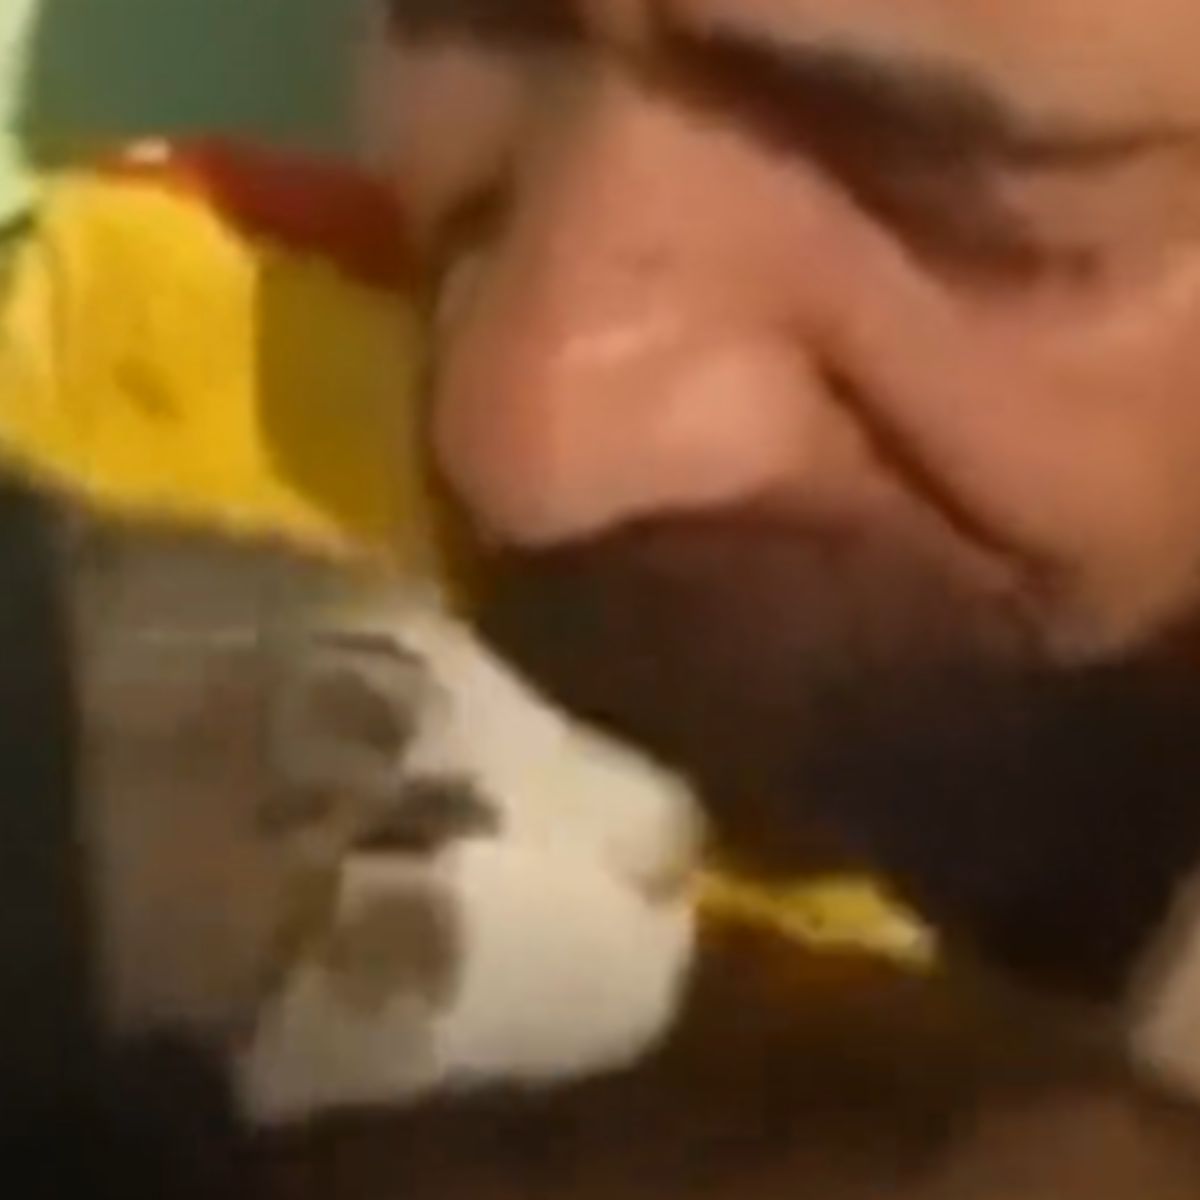 man holding a cat and crying